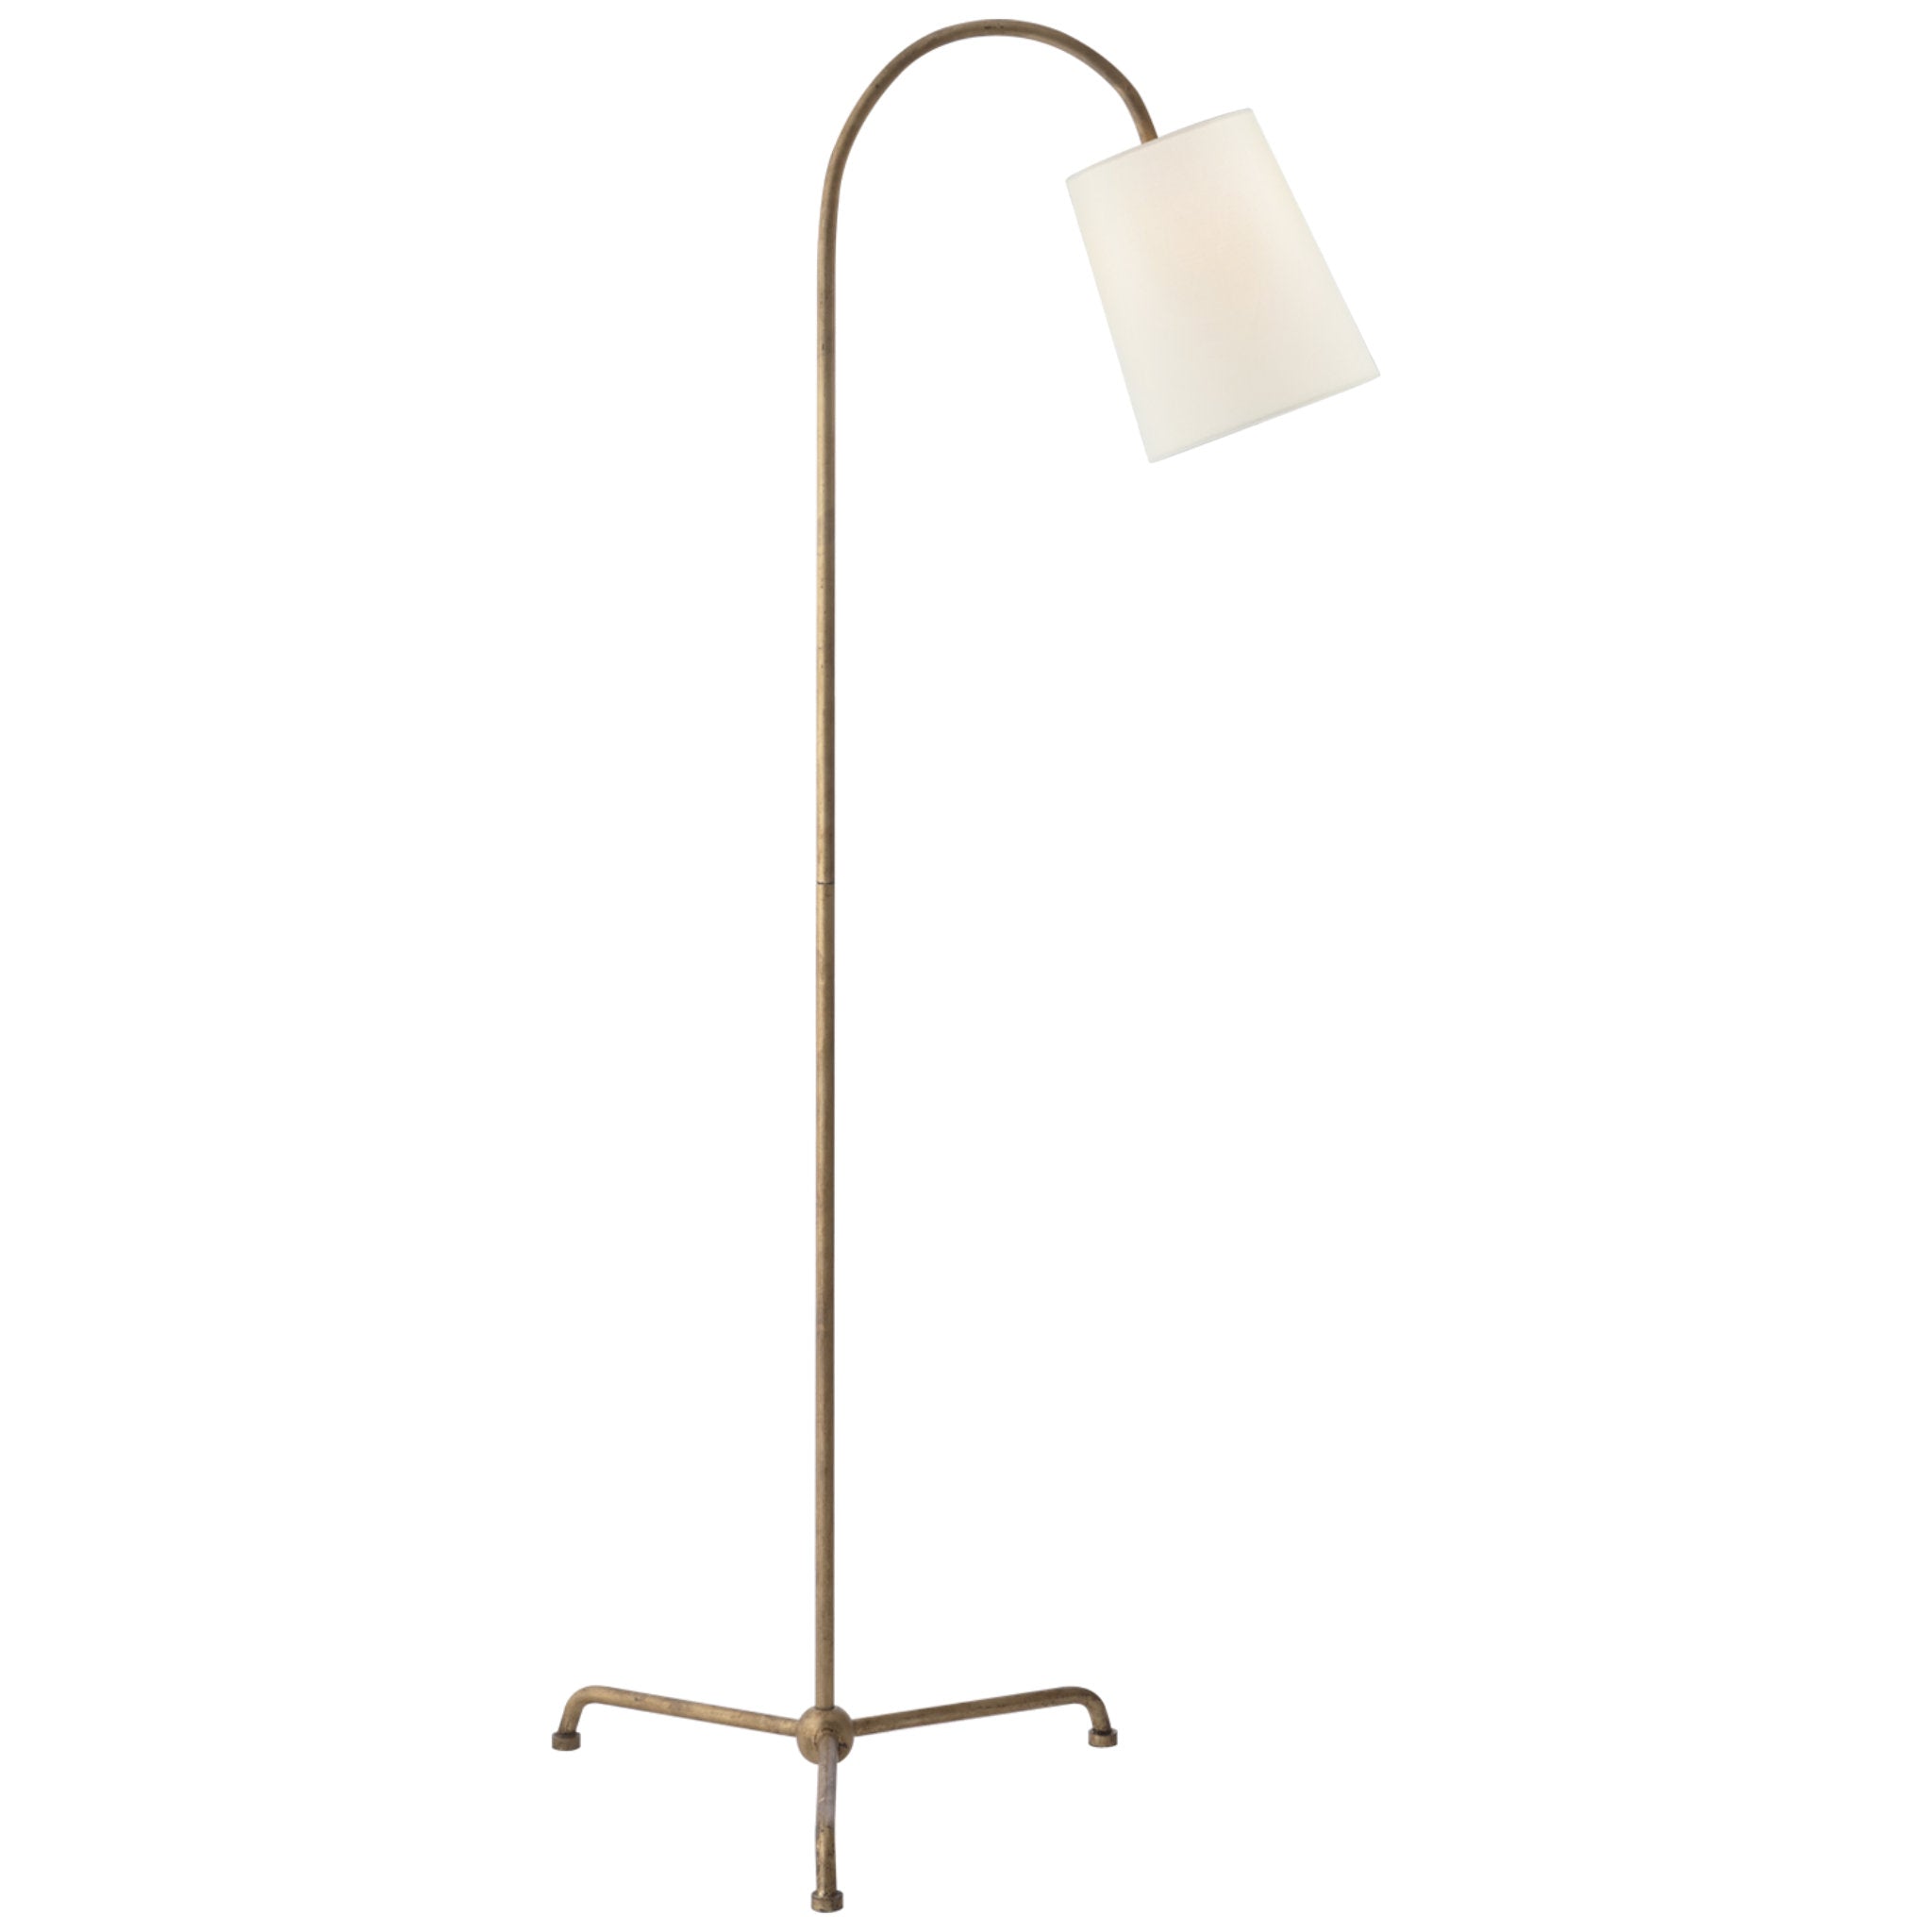 Thomas O'Brien Mia Floor Lamp in Gilded Iron with Linen Shade